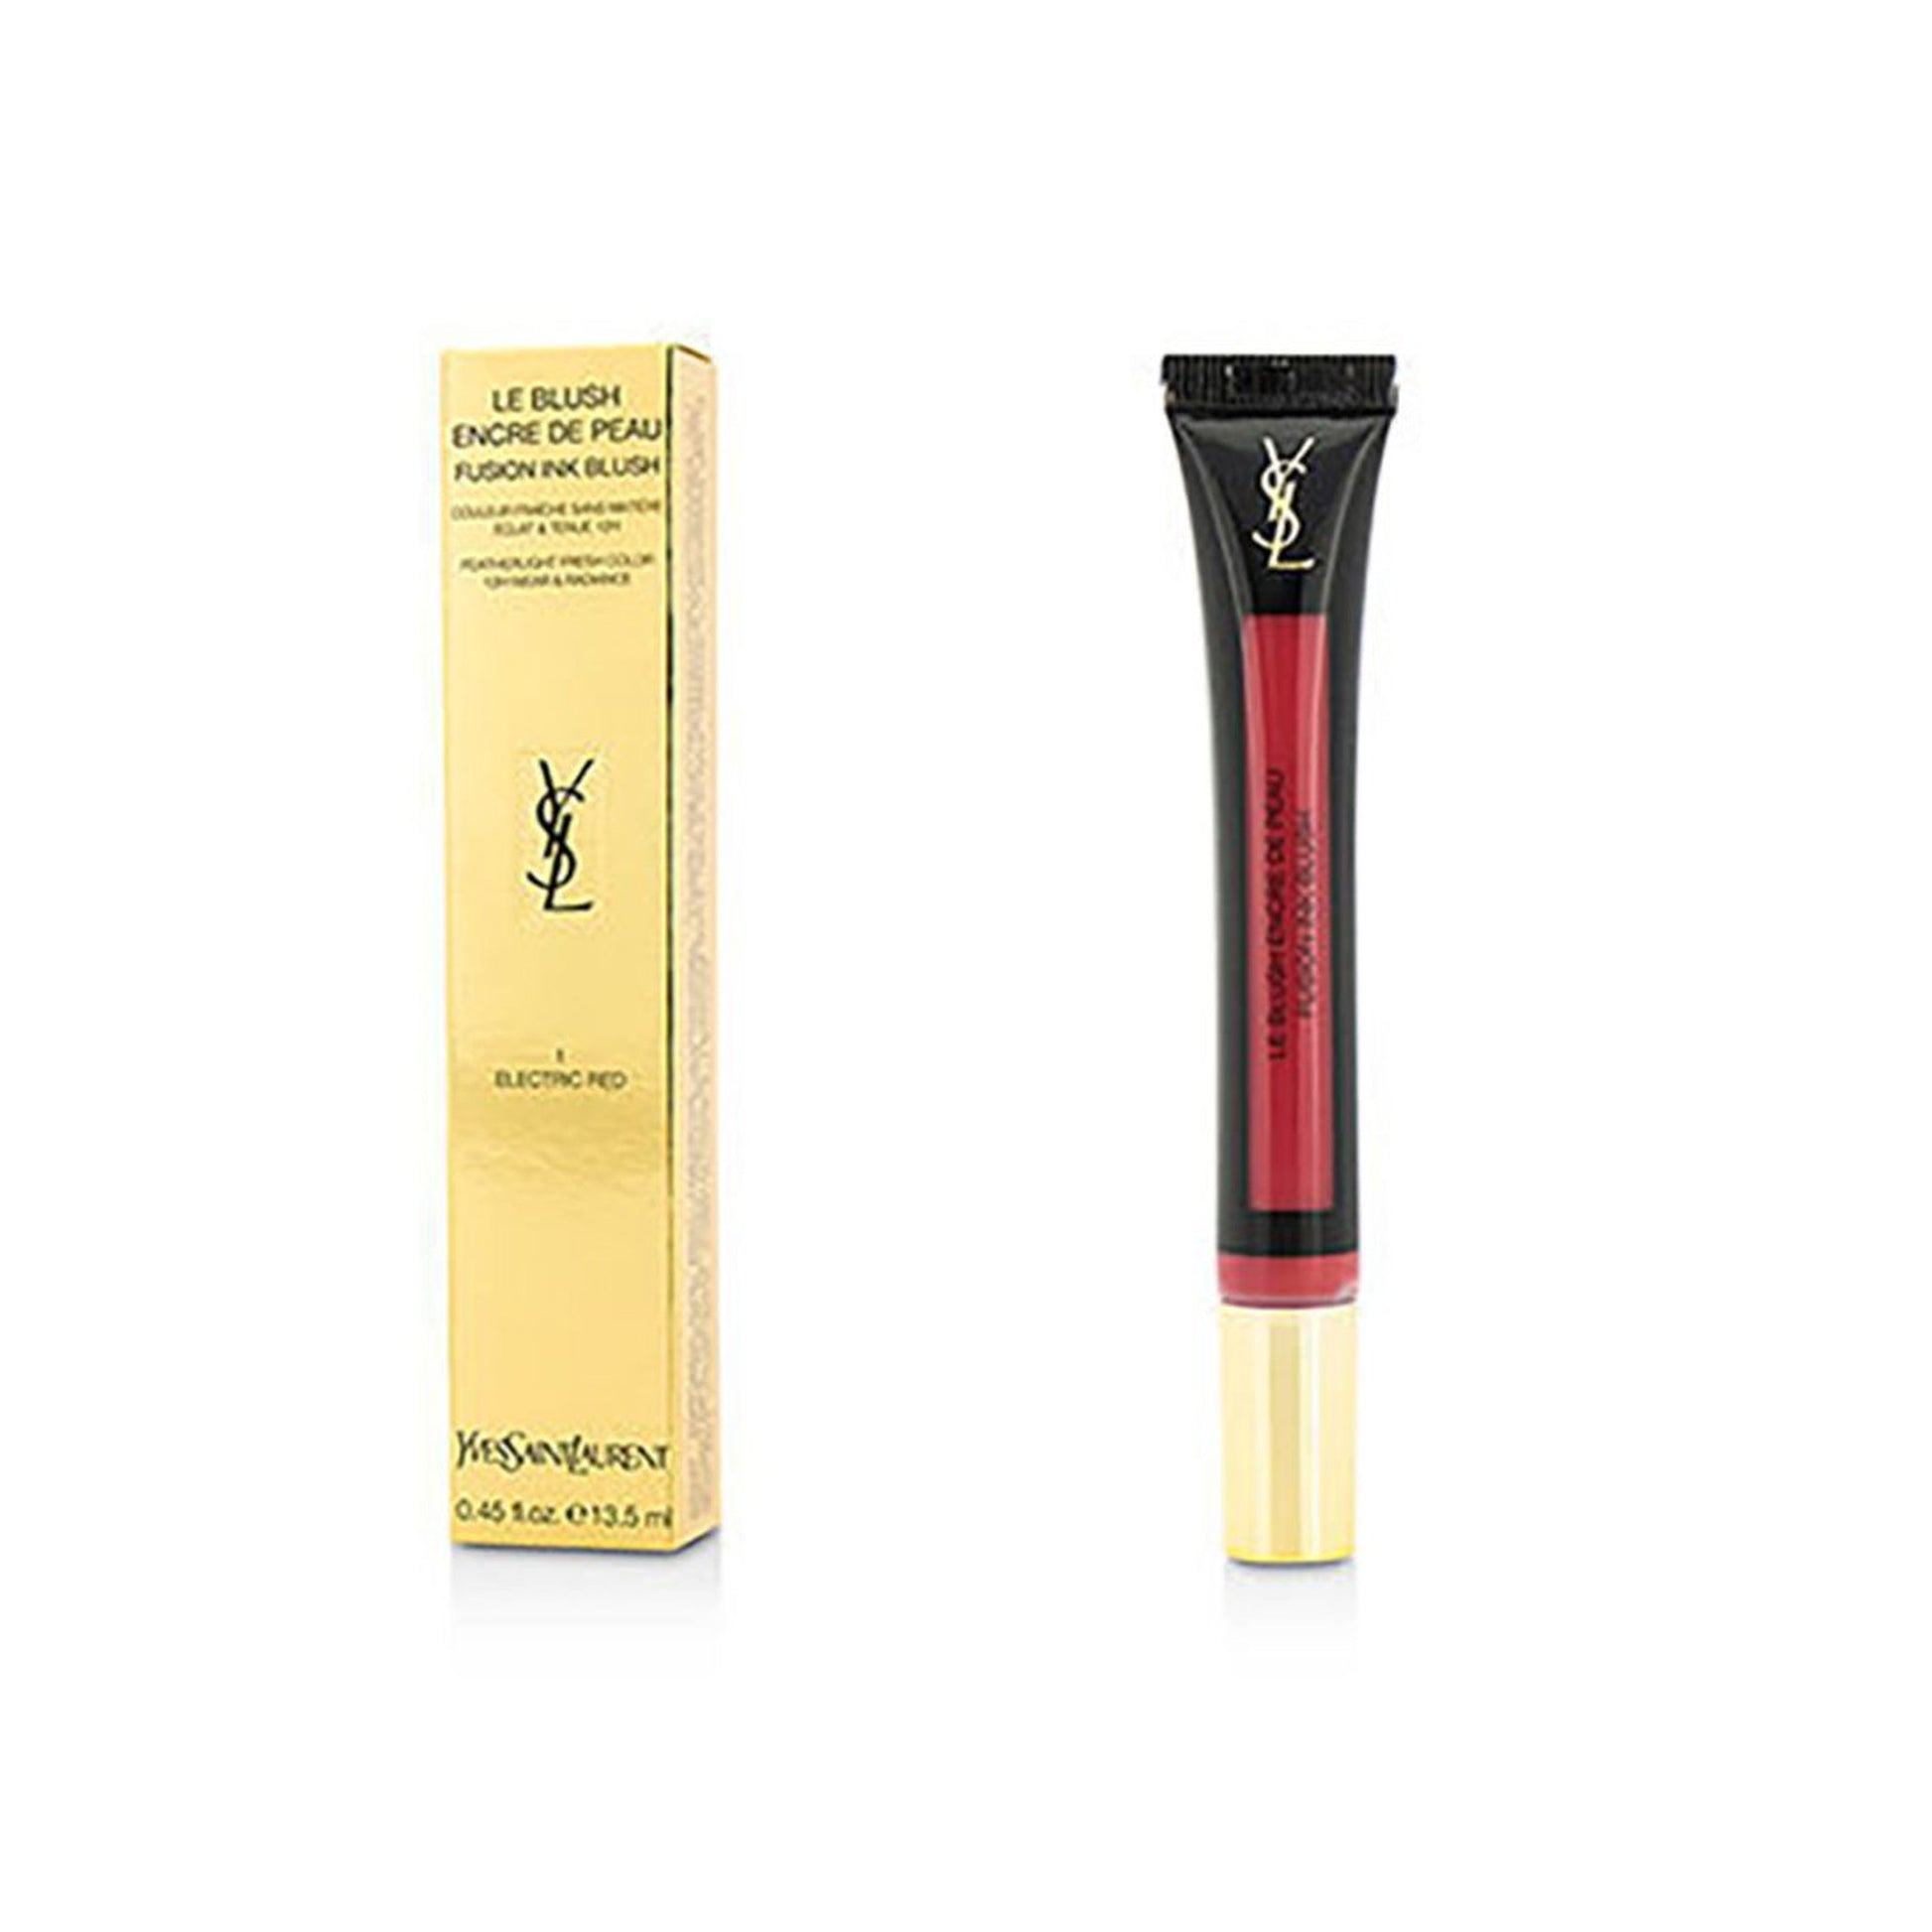 Yves Saint Laurent Le Blush Fusion Ink Pink Gel Blusher 1 Electric Red-YSL-BeautyNmakeup.co.uk